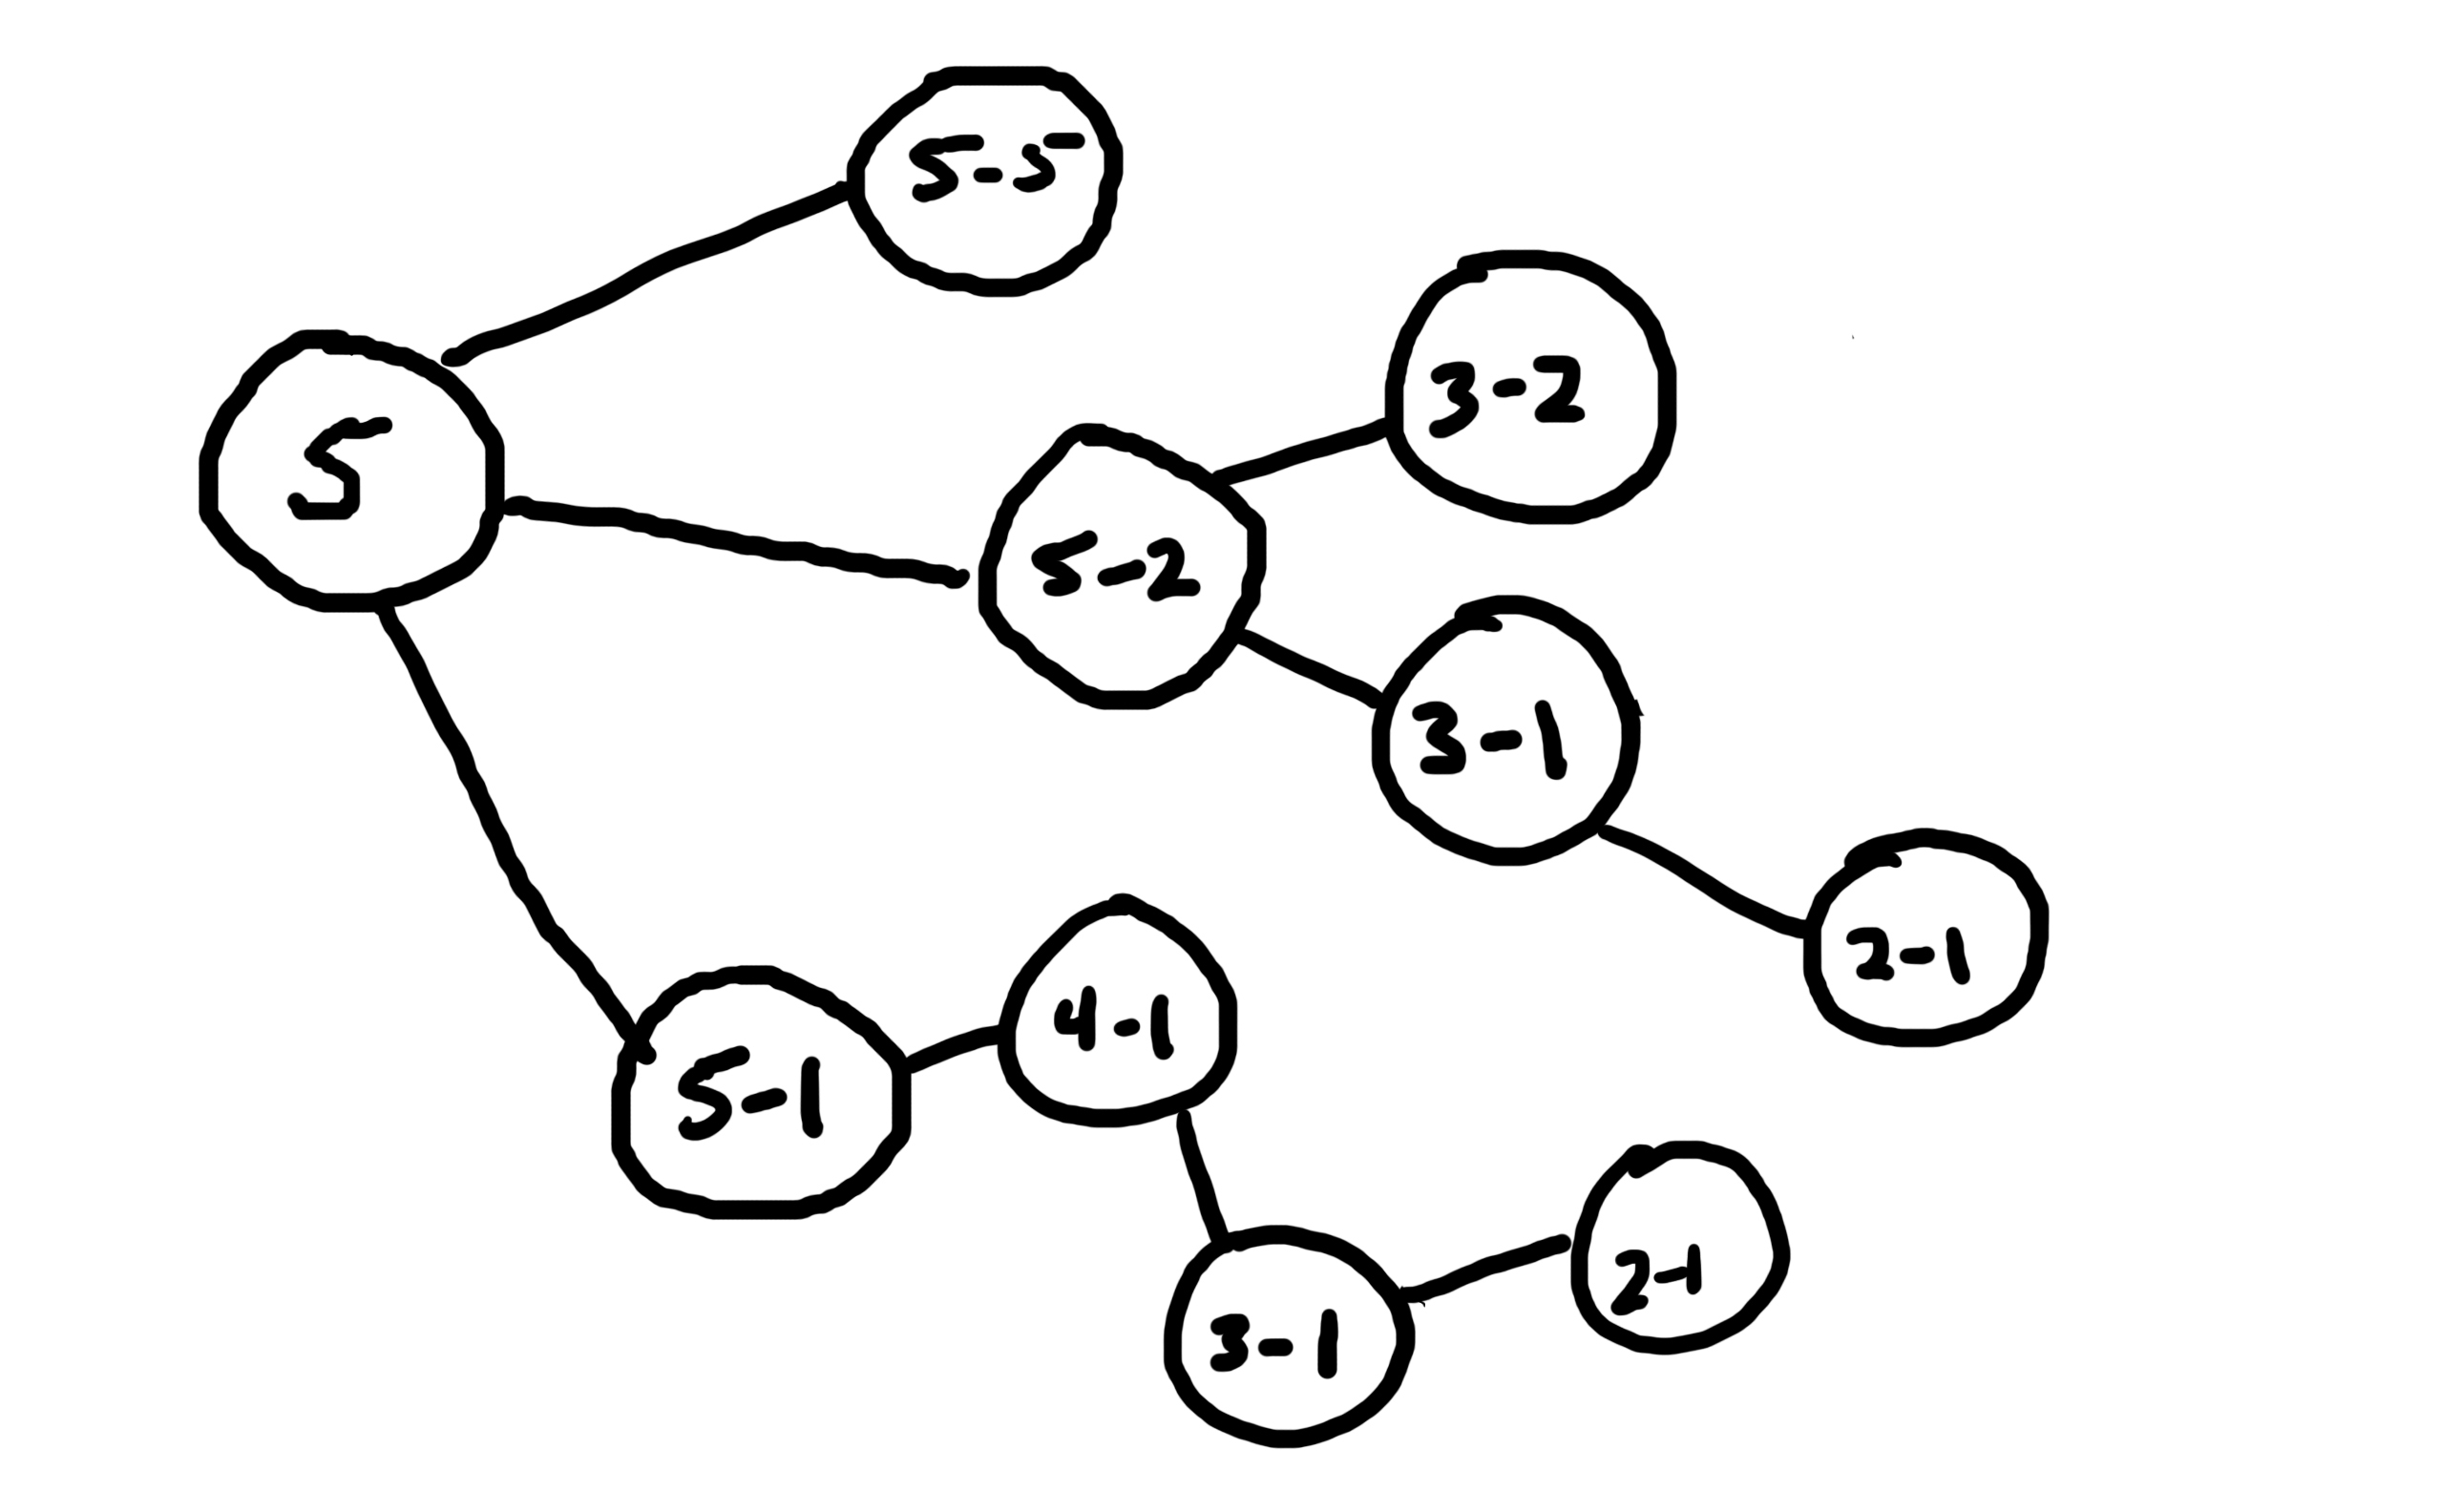 Tree-like structure for this algorithm